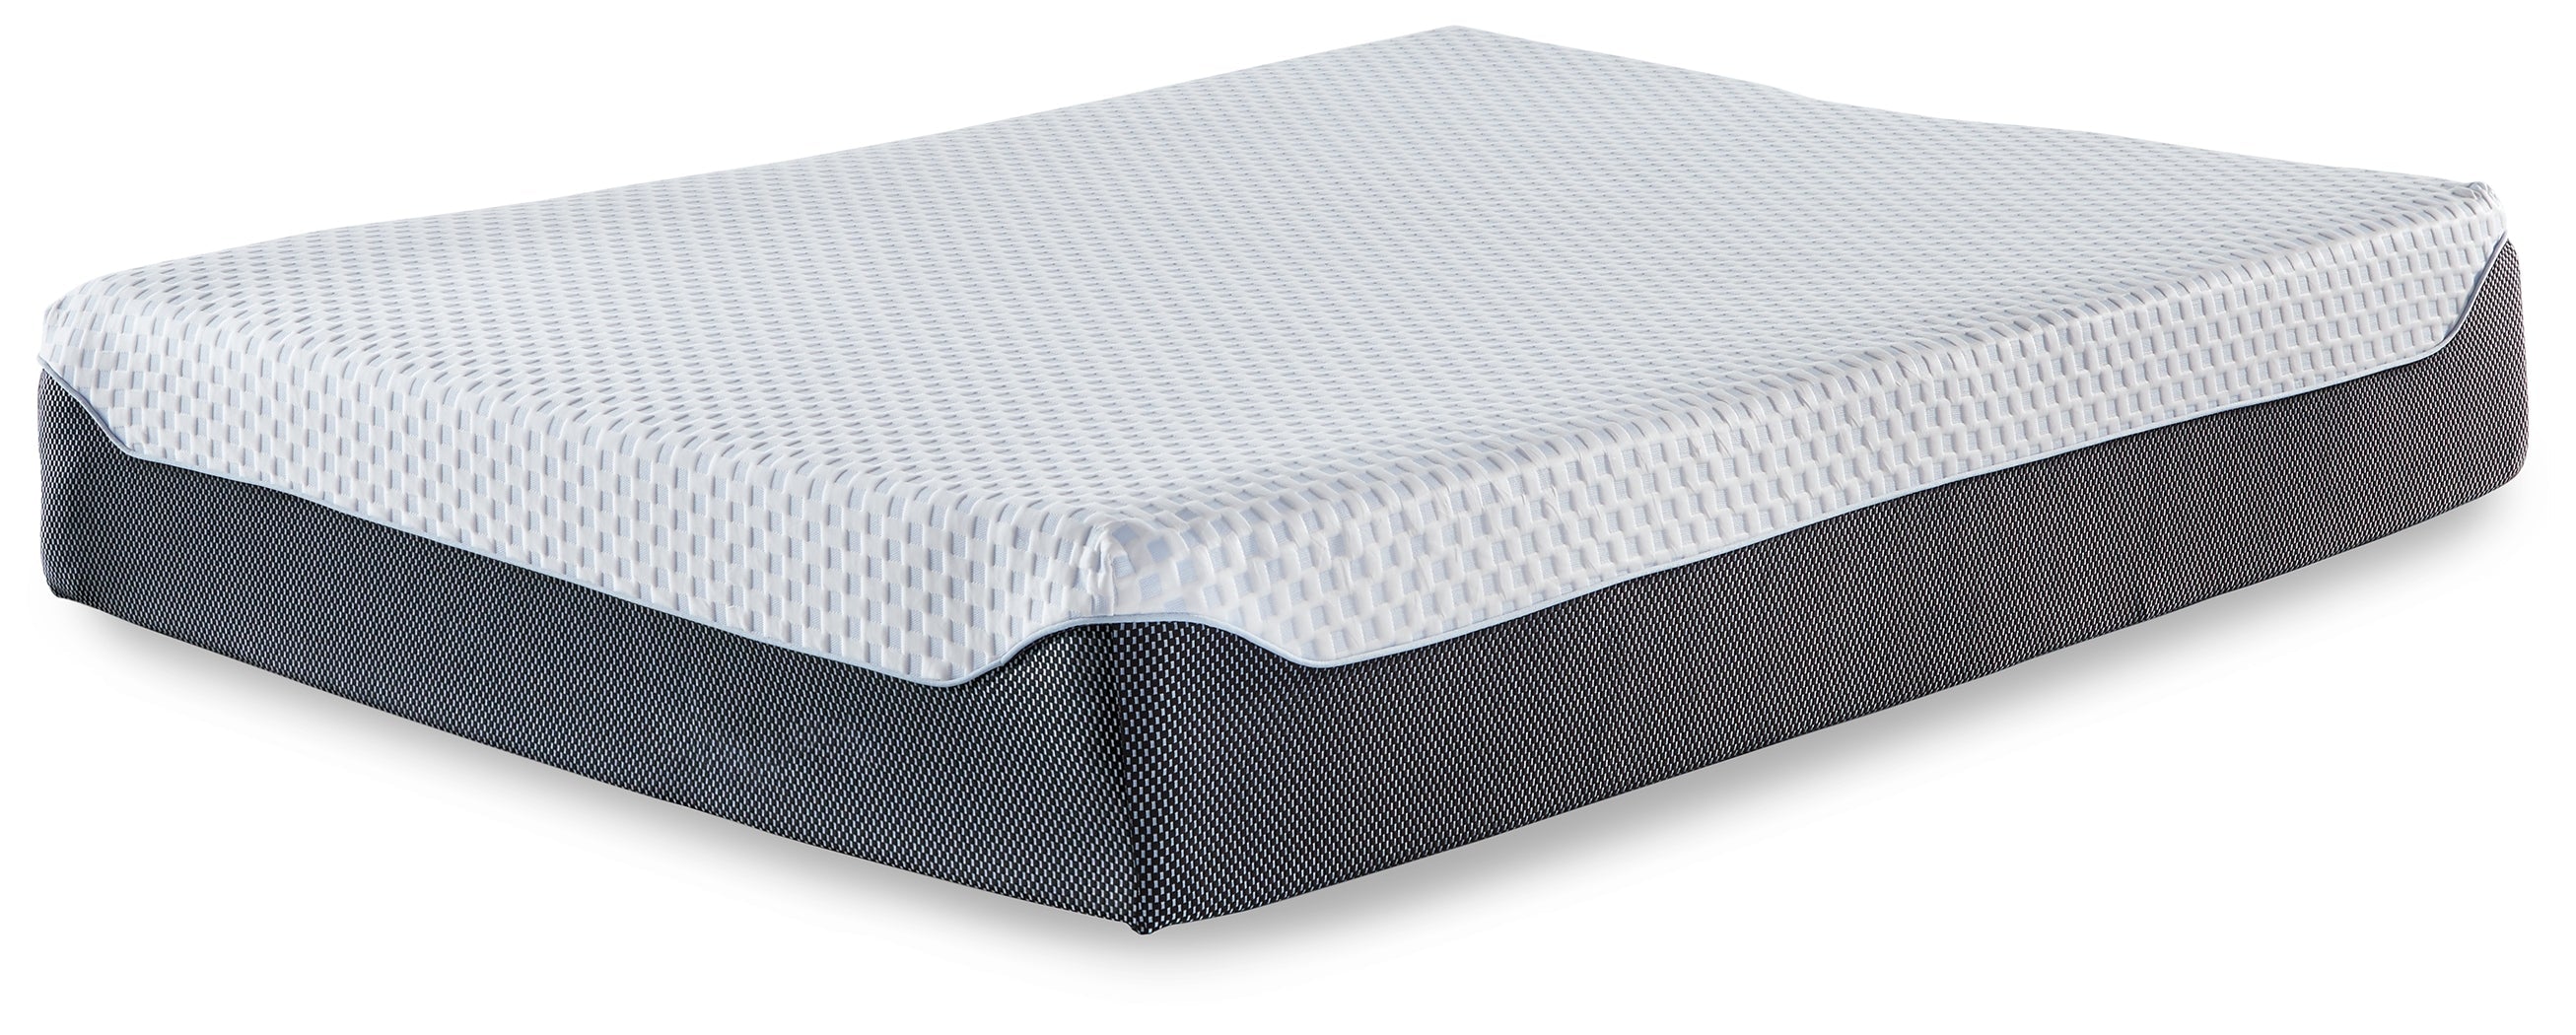 12 Inch Chime Elite Twin Memory Foam Mattress in a box with Better than a Boxspring Twin Foundation - furniture place usa